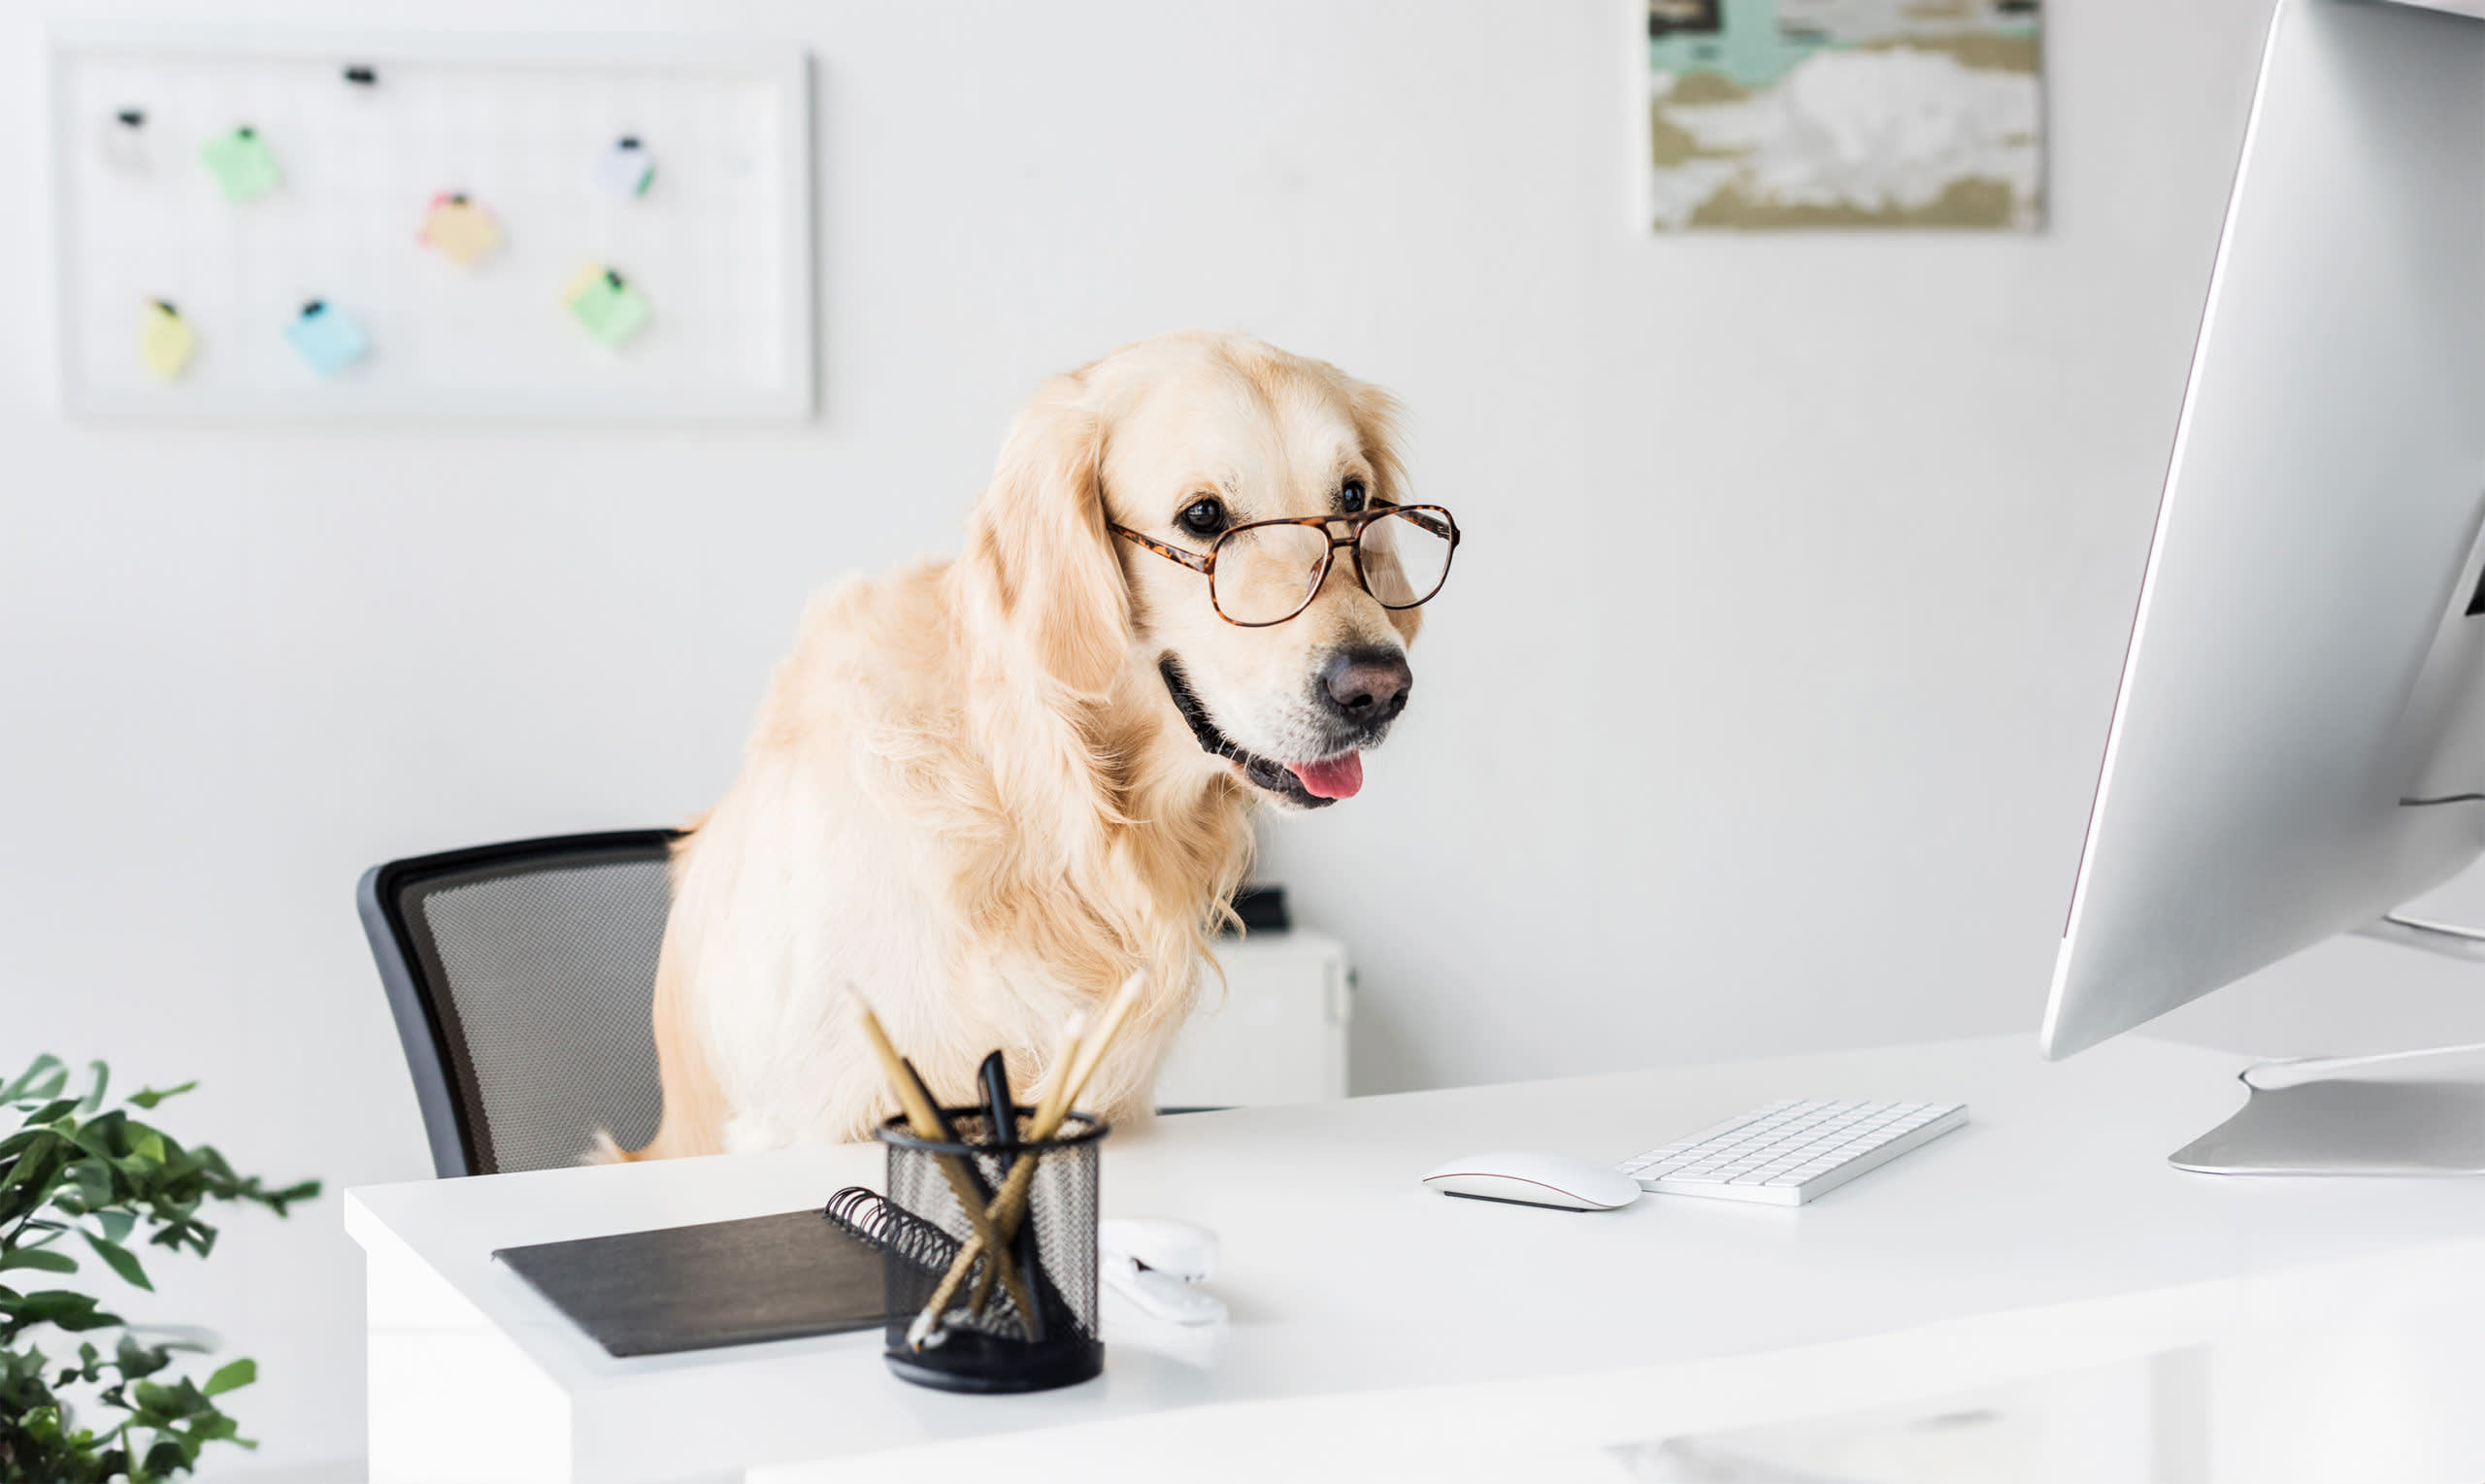 A Golden Retriever wearing glasses and sitting at a computer desk.